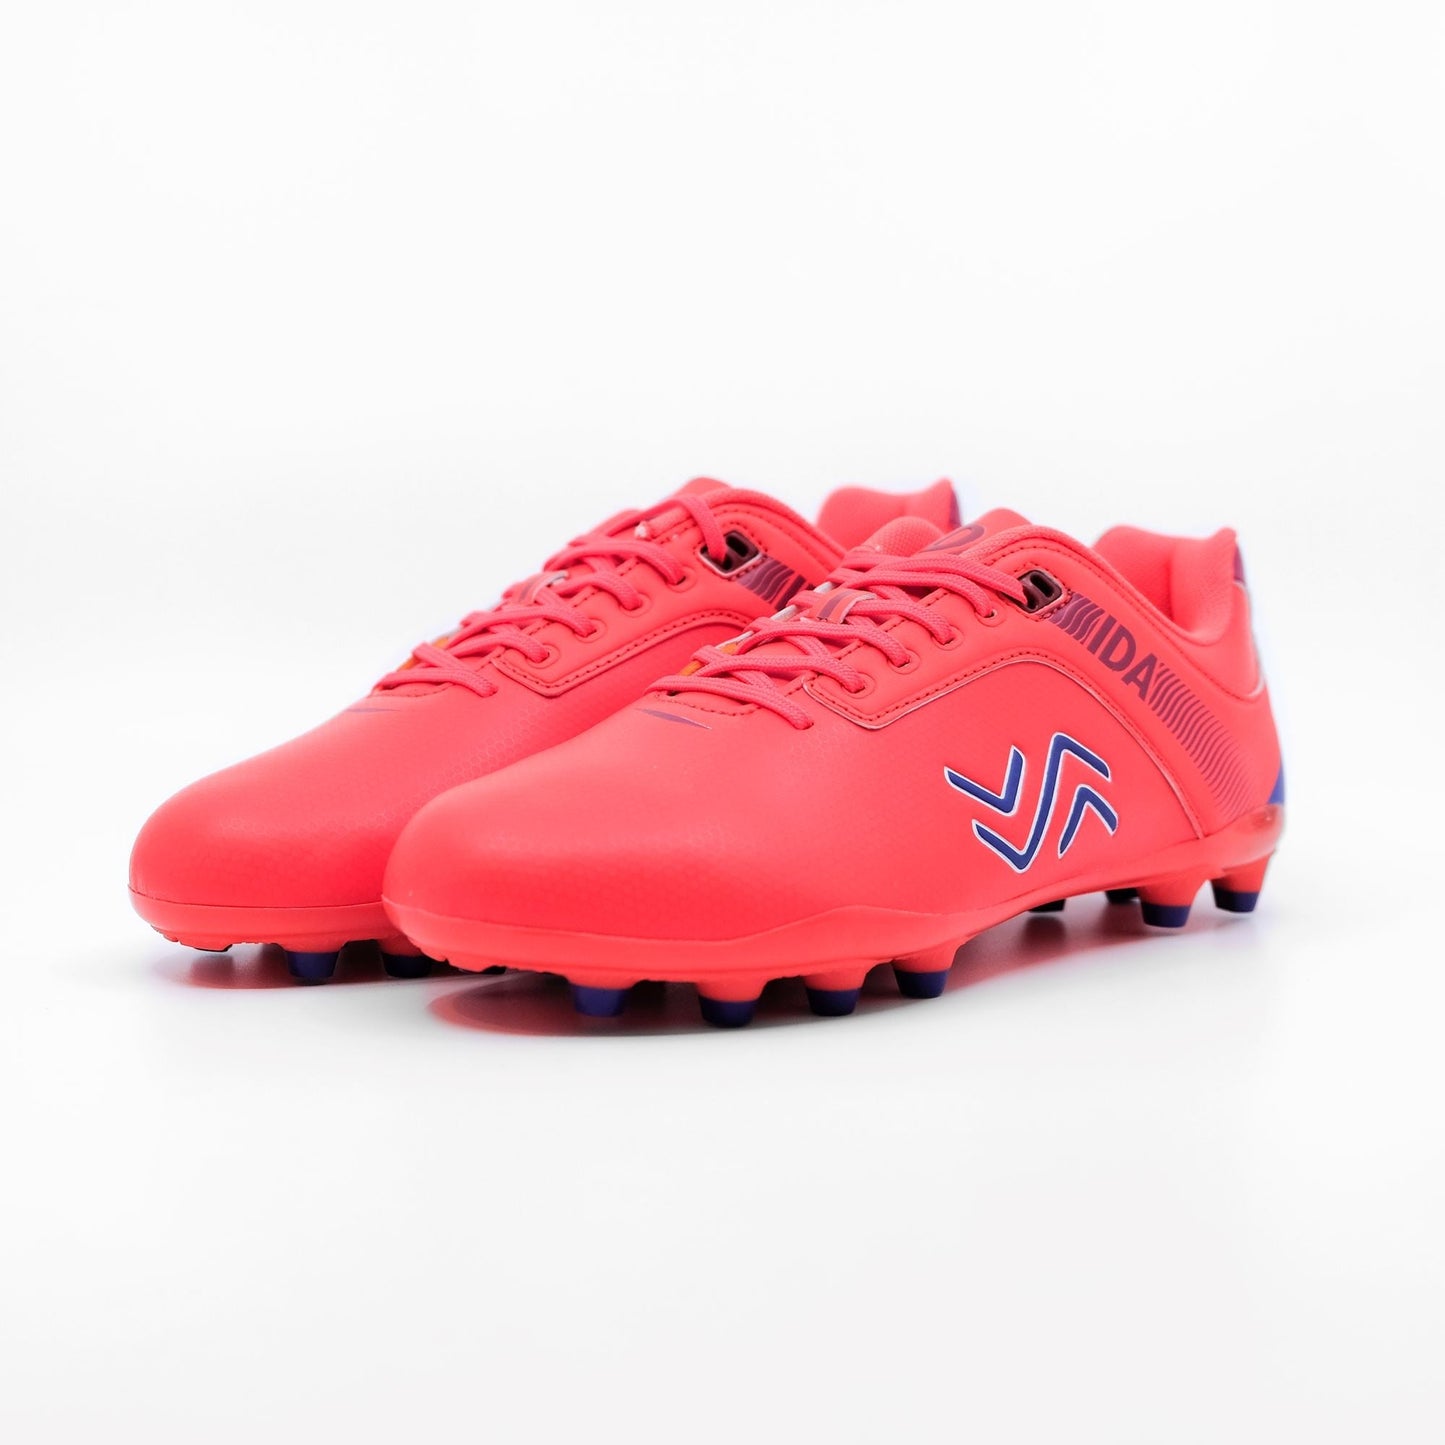 IDA Centra Women's Soccer Cleat, Coral Red, FG/AG, Firm Ground, Artificial Ground